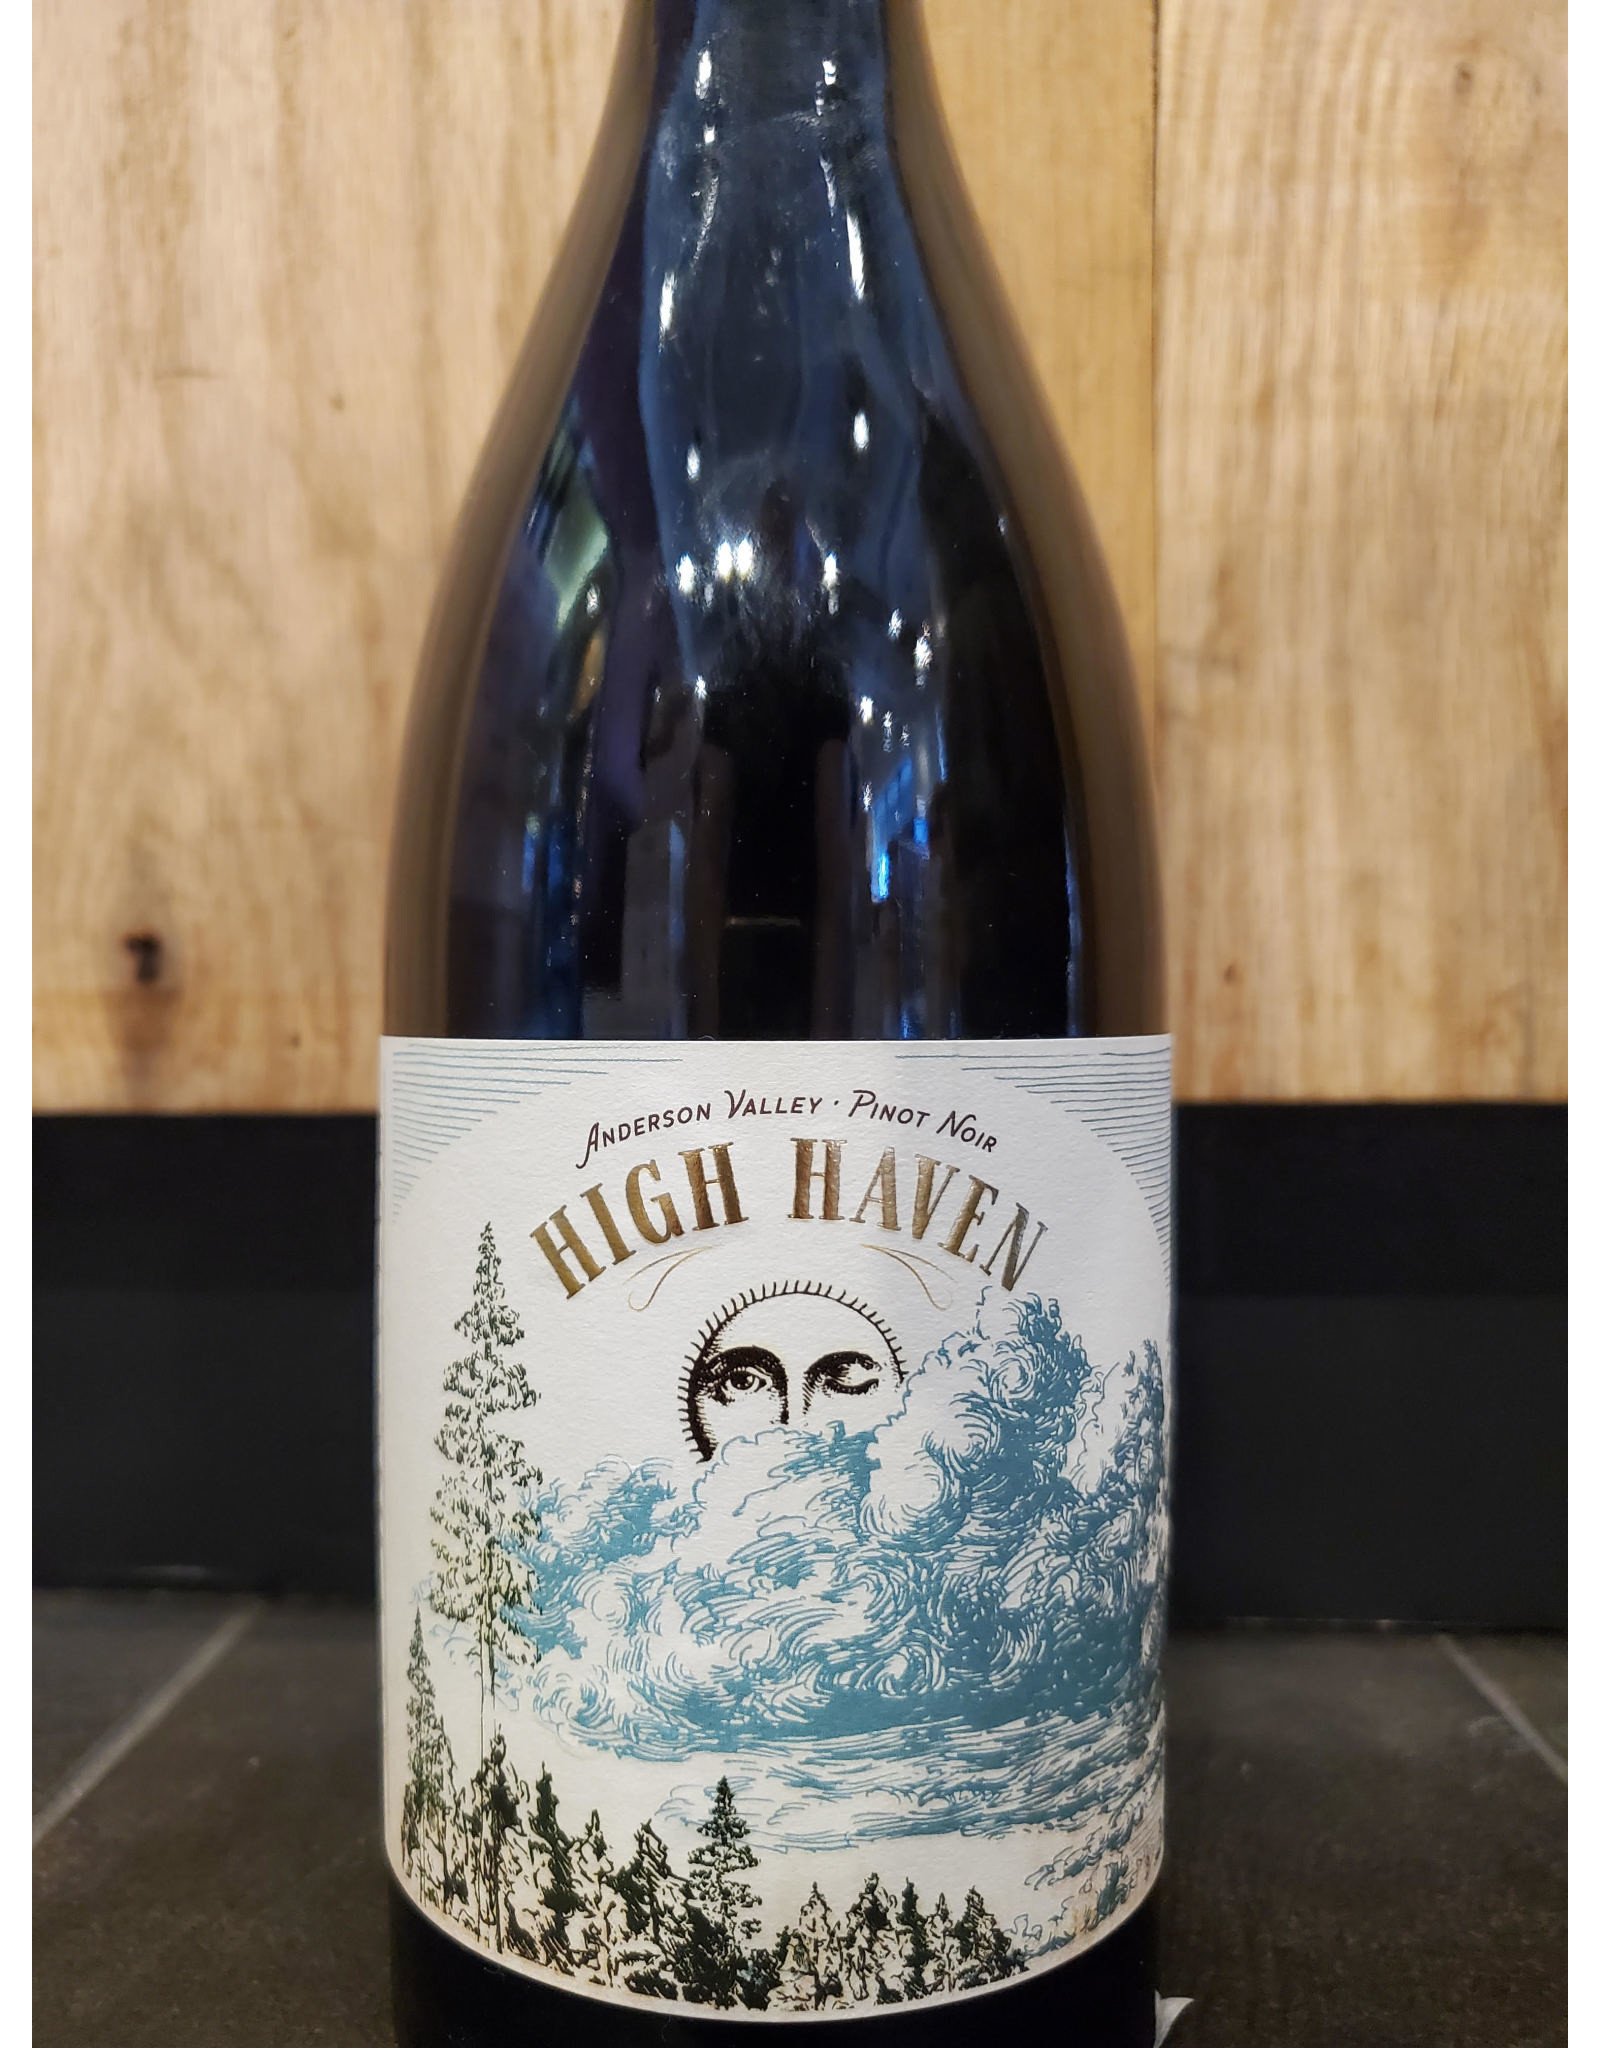 High Haven, Pinot Noir, Anderson Valley, 2020